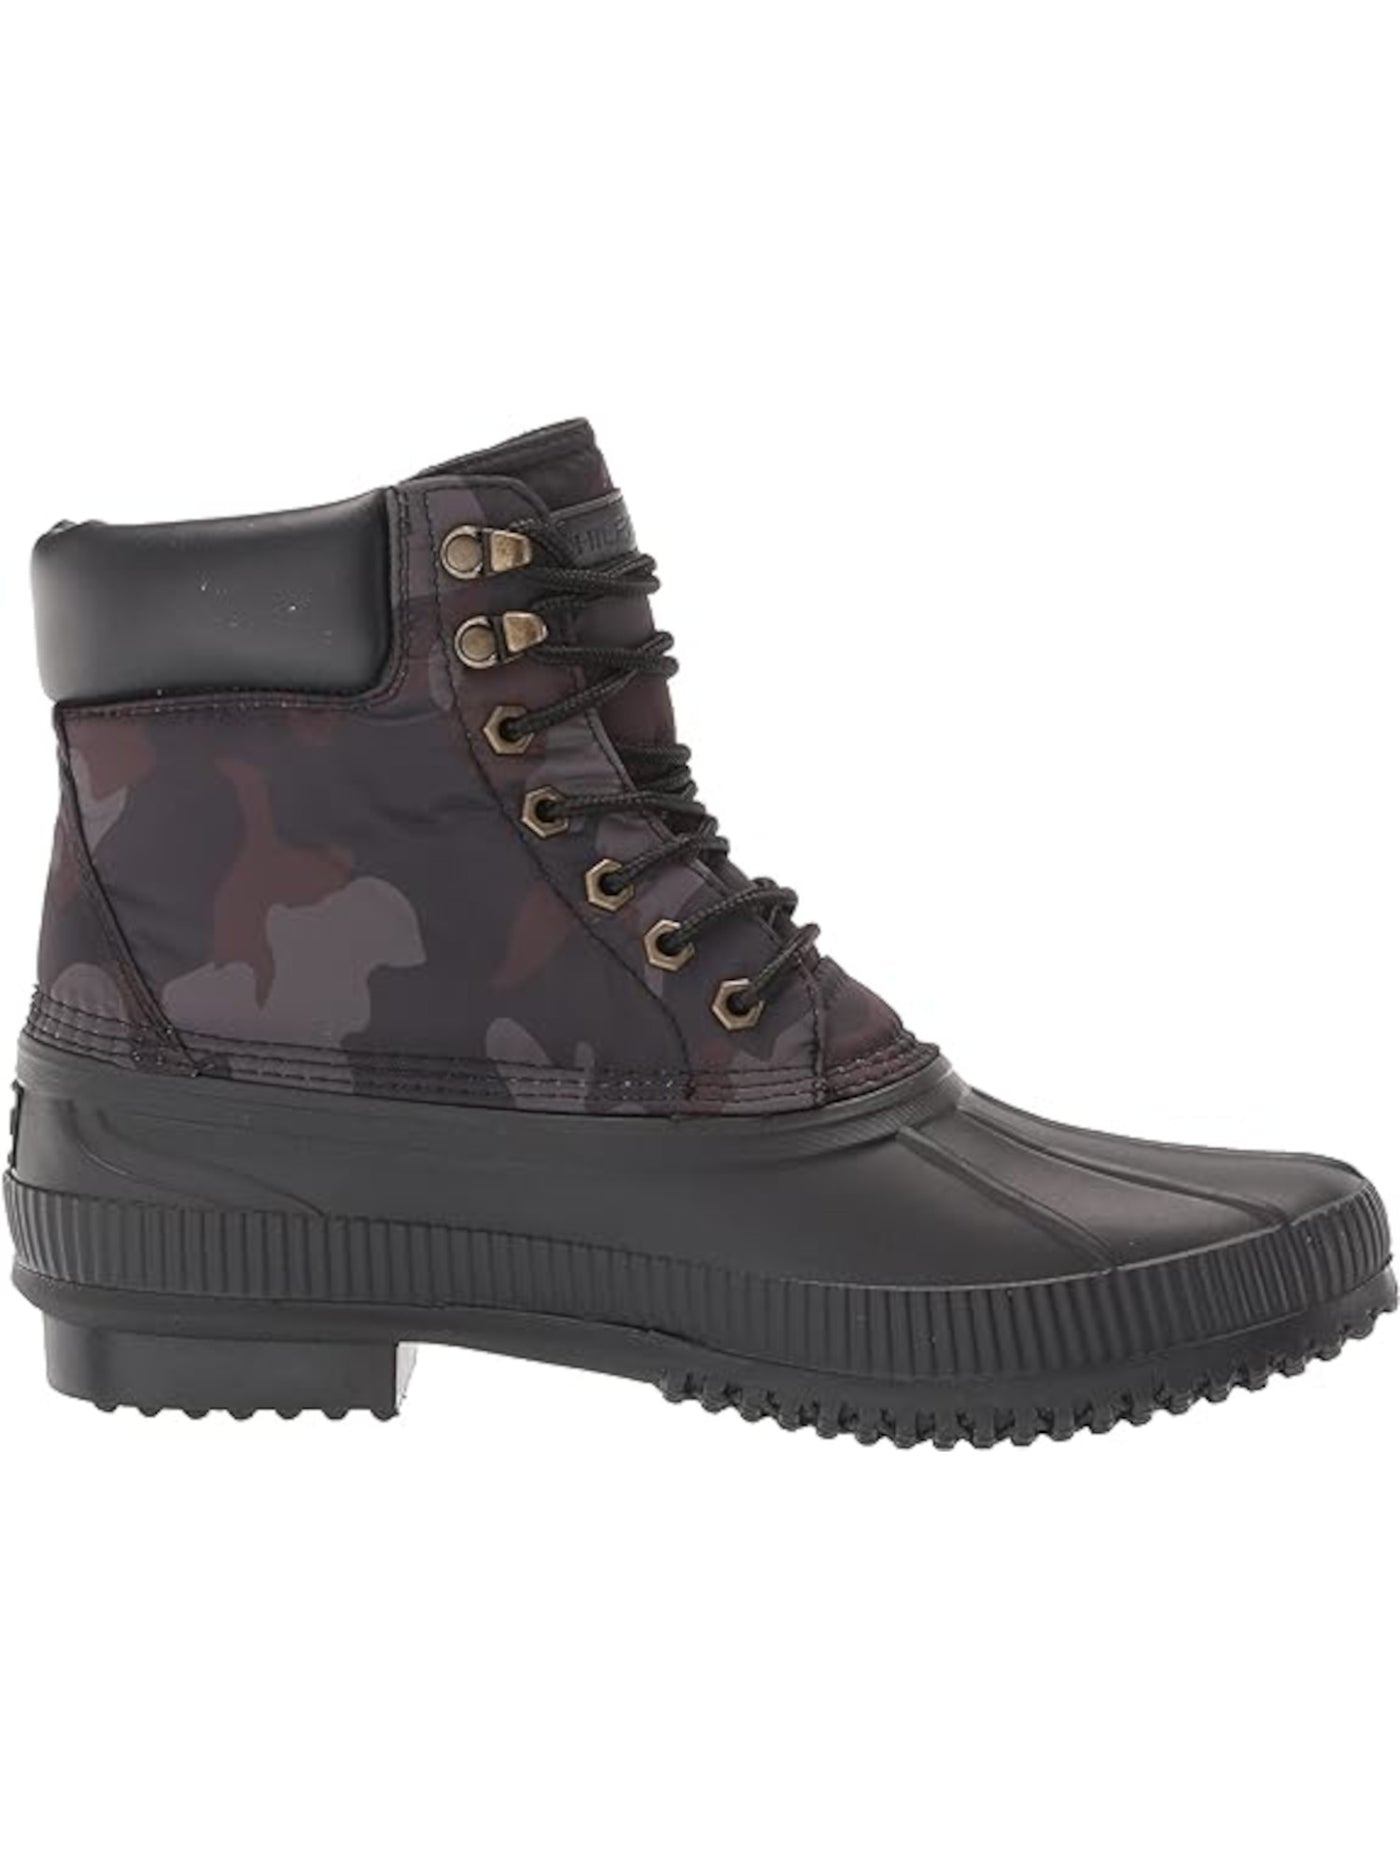 TOMMY HILFIGER Mens Gray Camouflage Water Resistant Colins4 Round Toe Lace-Up Duck Boots 13 M